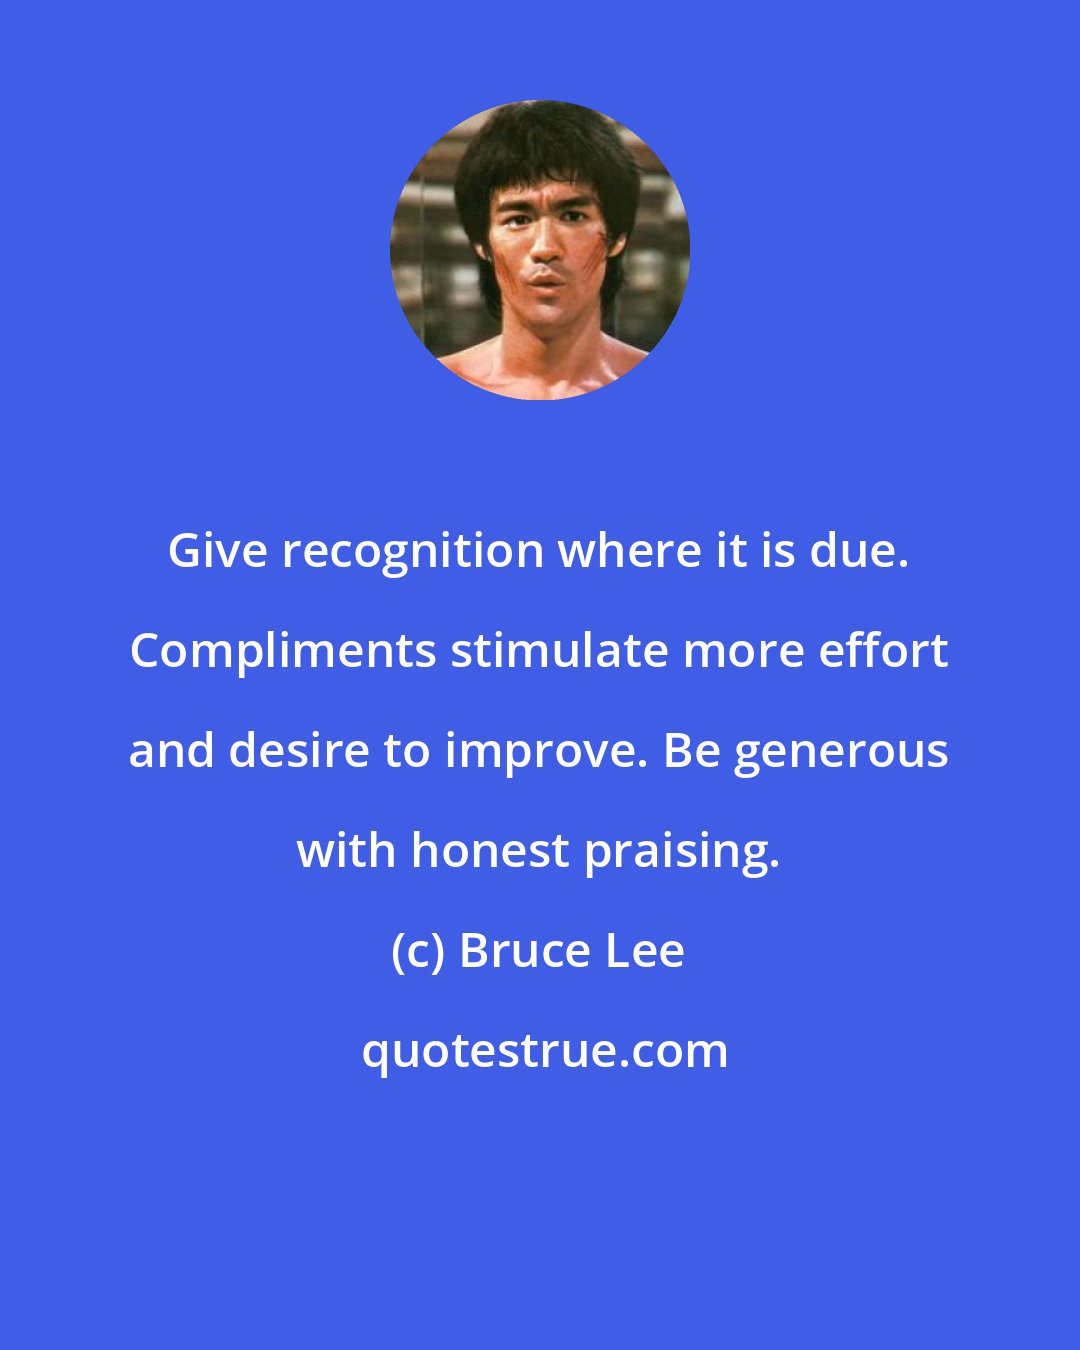 Bruce Lee: Give recognition where it is due. Compliments stimulate more effort and desire to improve. Be generous with honest praising.